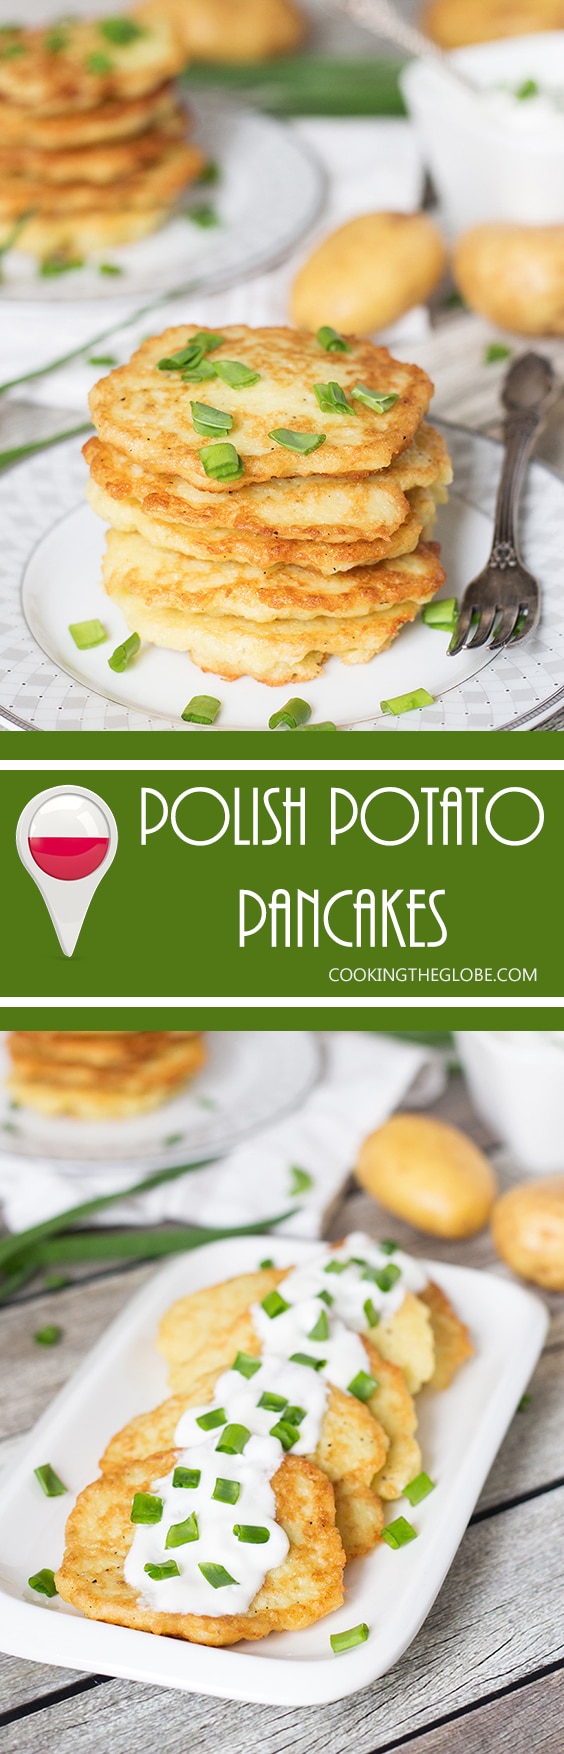 These Polish Potato Pancakes are amazingly delicious and require only few simple ingredients to make! | cookingtheglobe.com